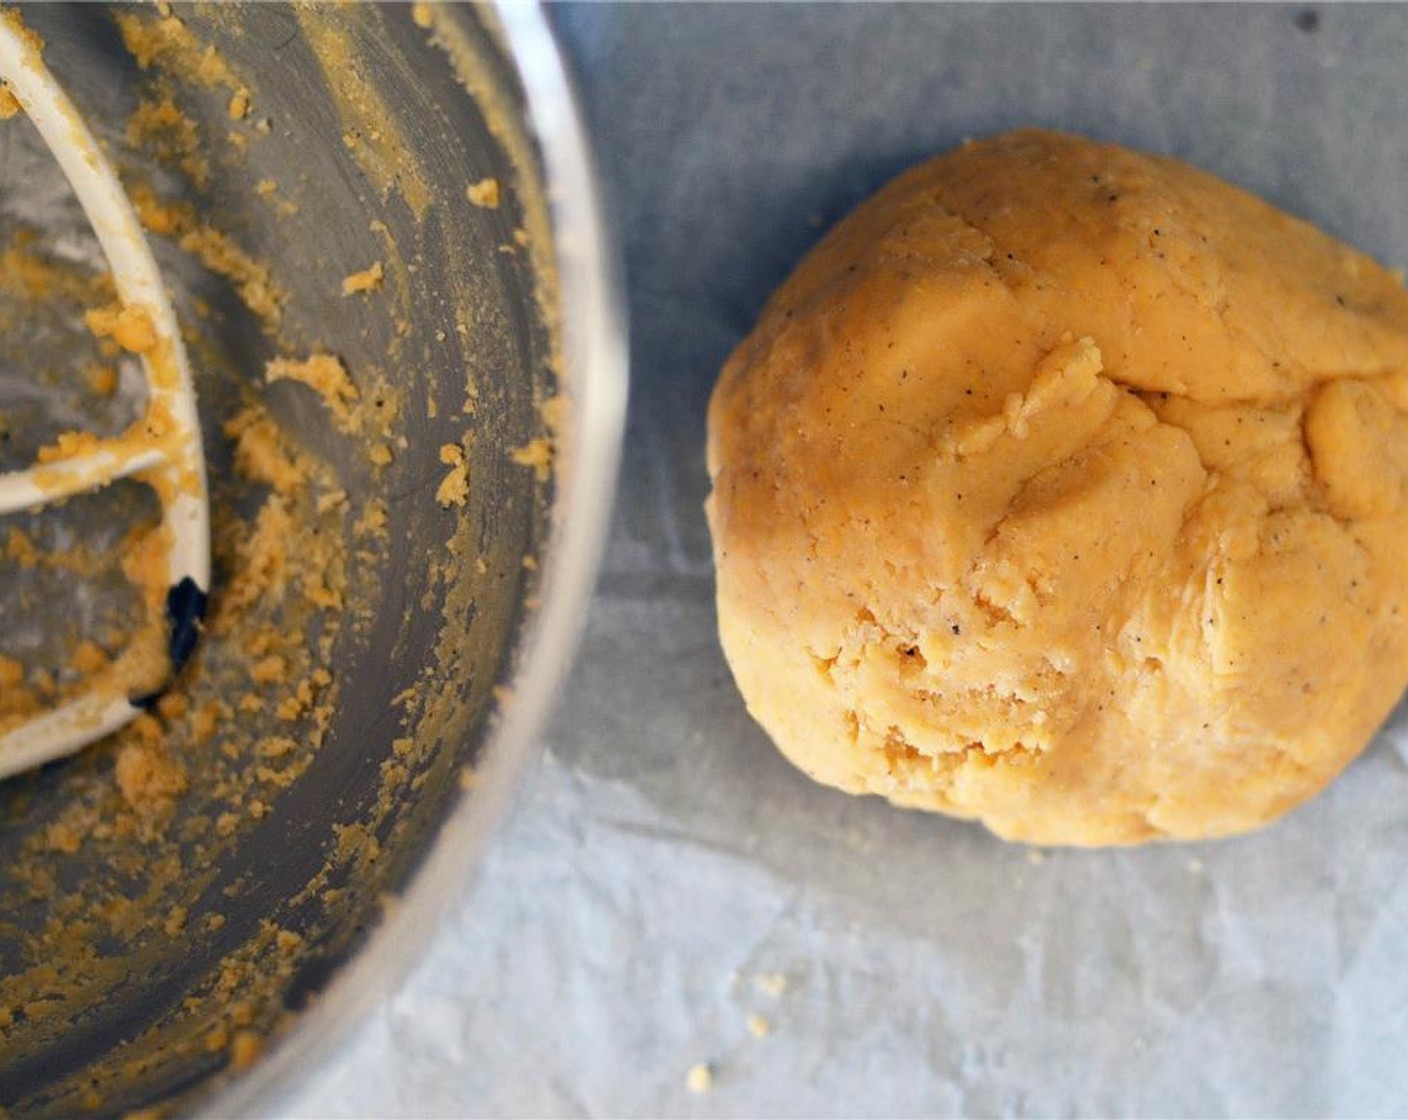 step 3 With mixer on low, beat in flour mixture and continue to beat until dough forms into a ball. Dump dough onto a lightly floured surface and knead a few times to form into a uniformed dough ball.